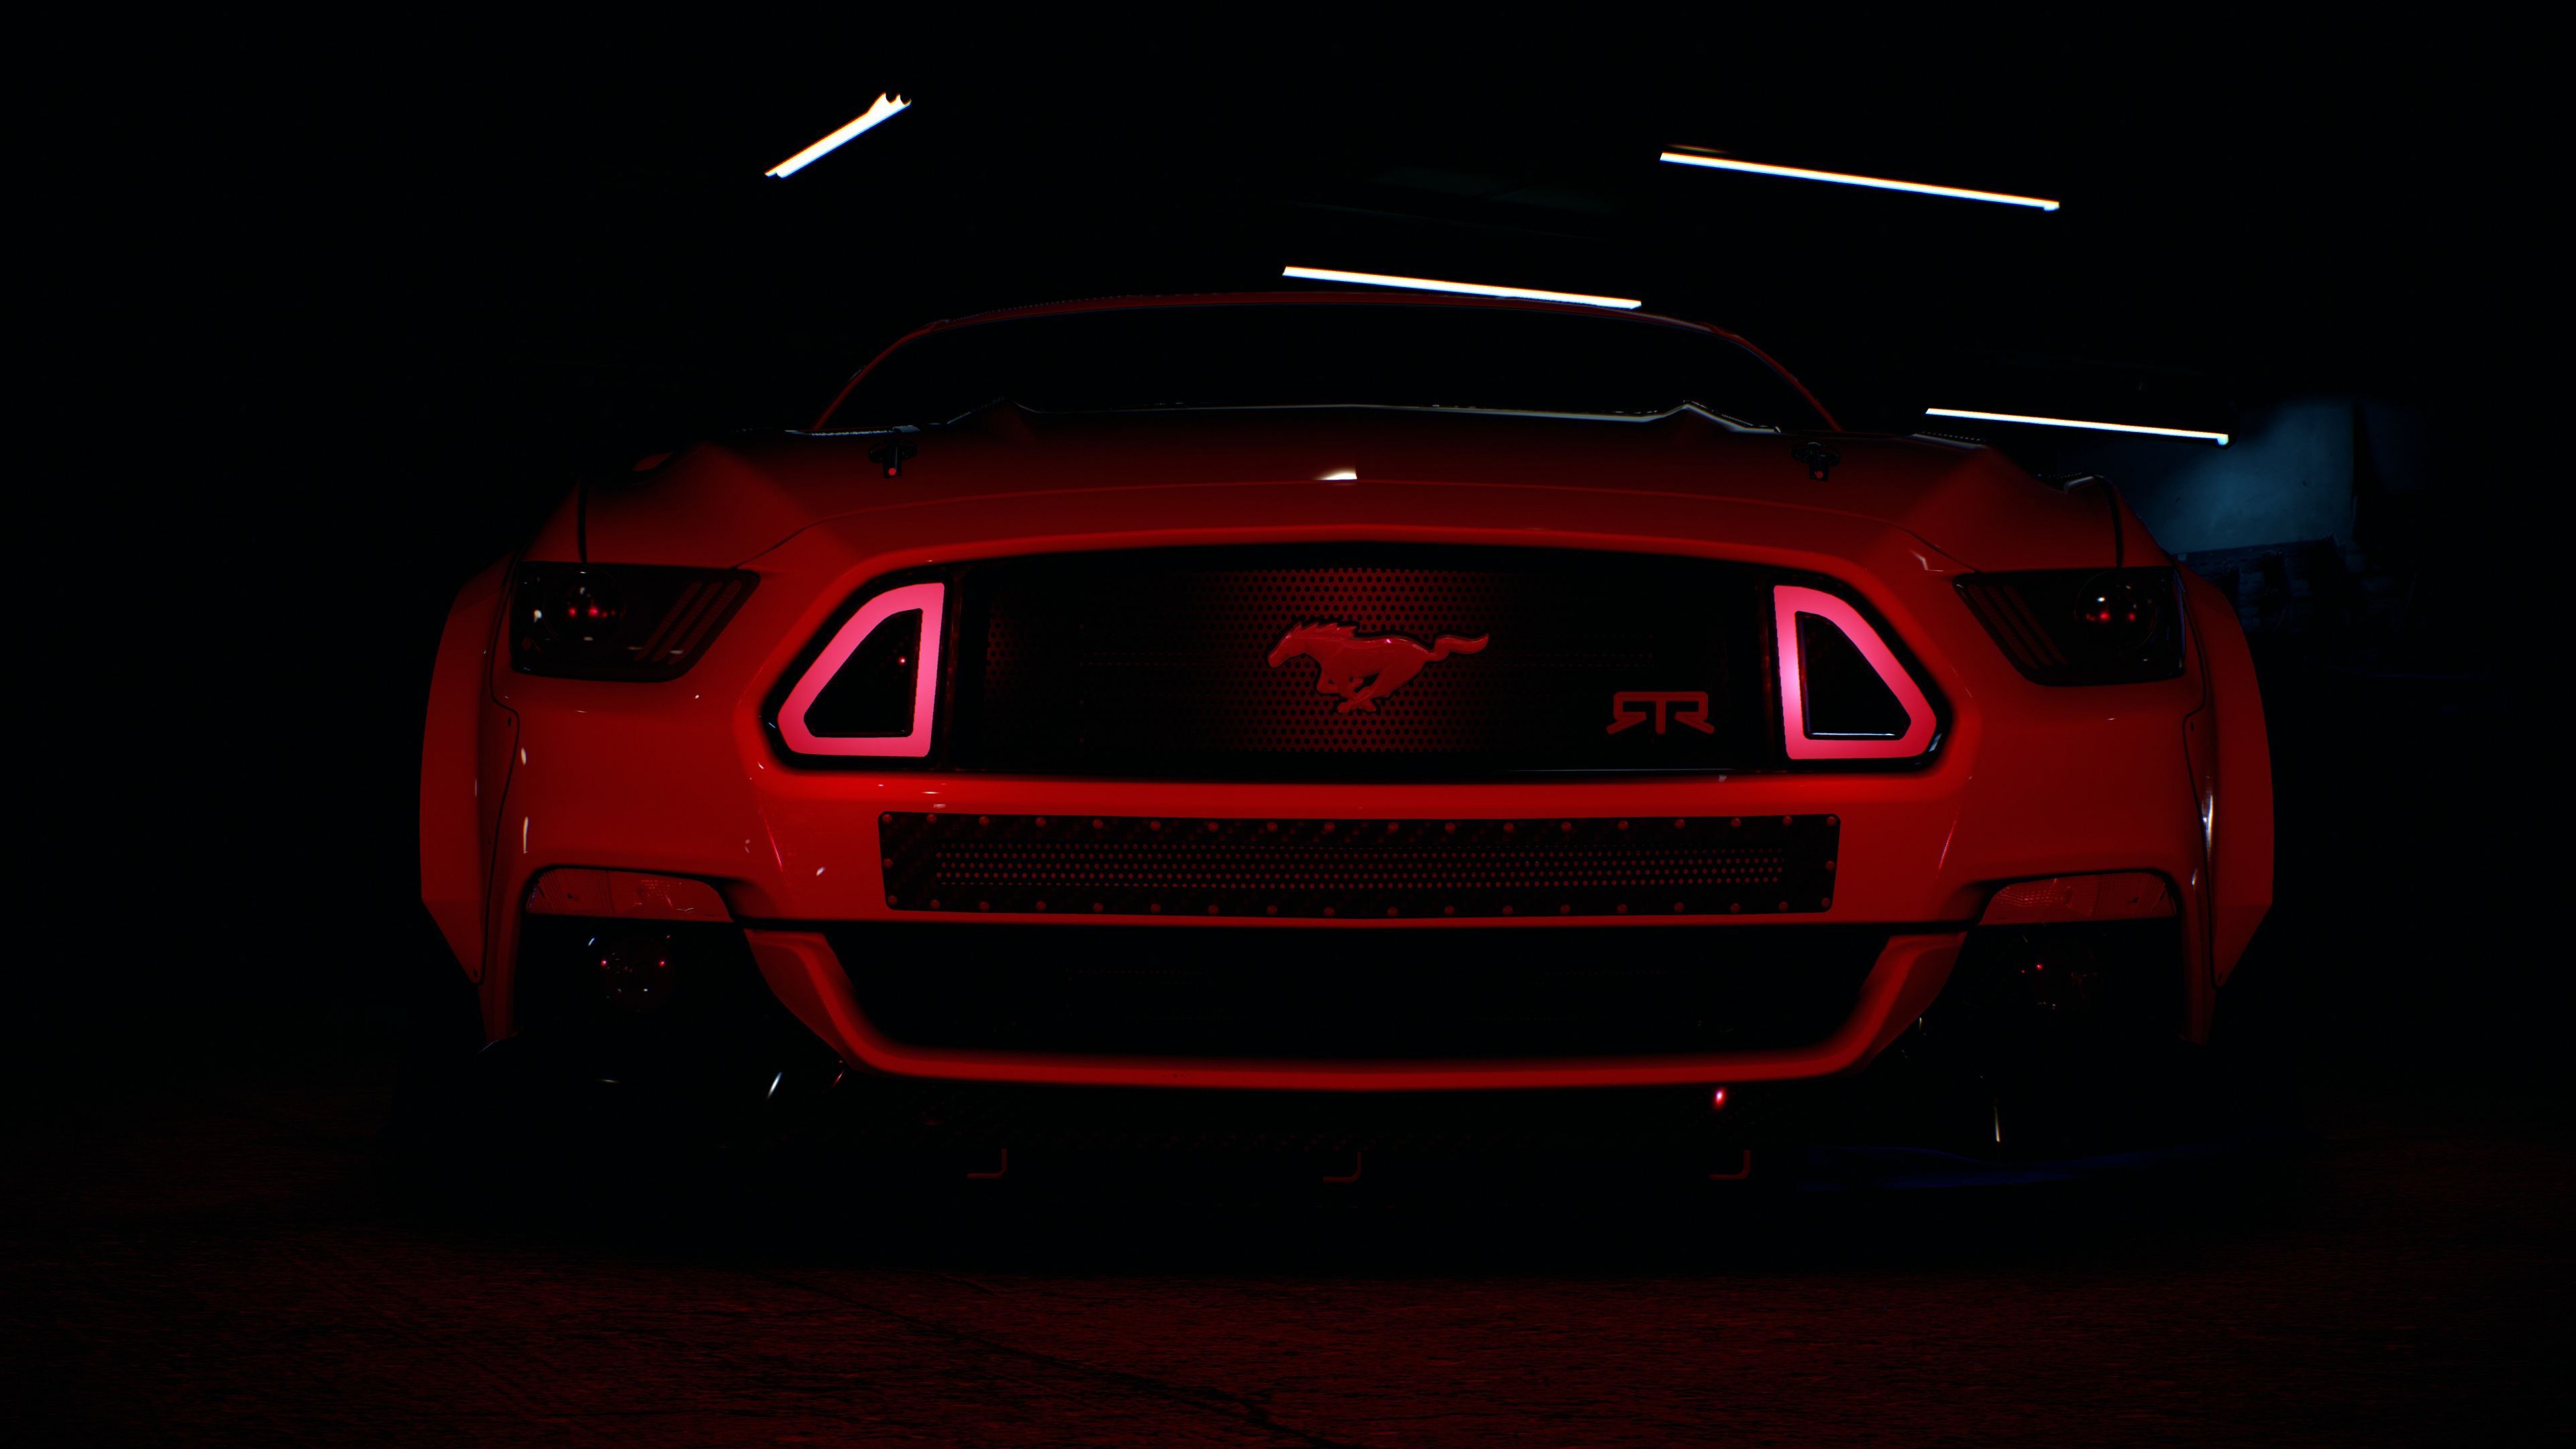 Ford Mustang GT front Wallpaper 4k Ultra HD ID11065